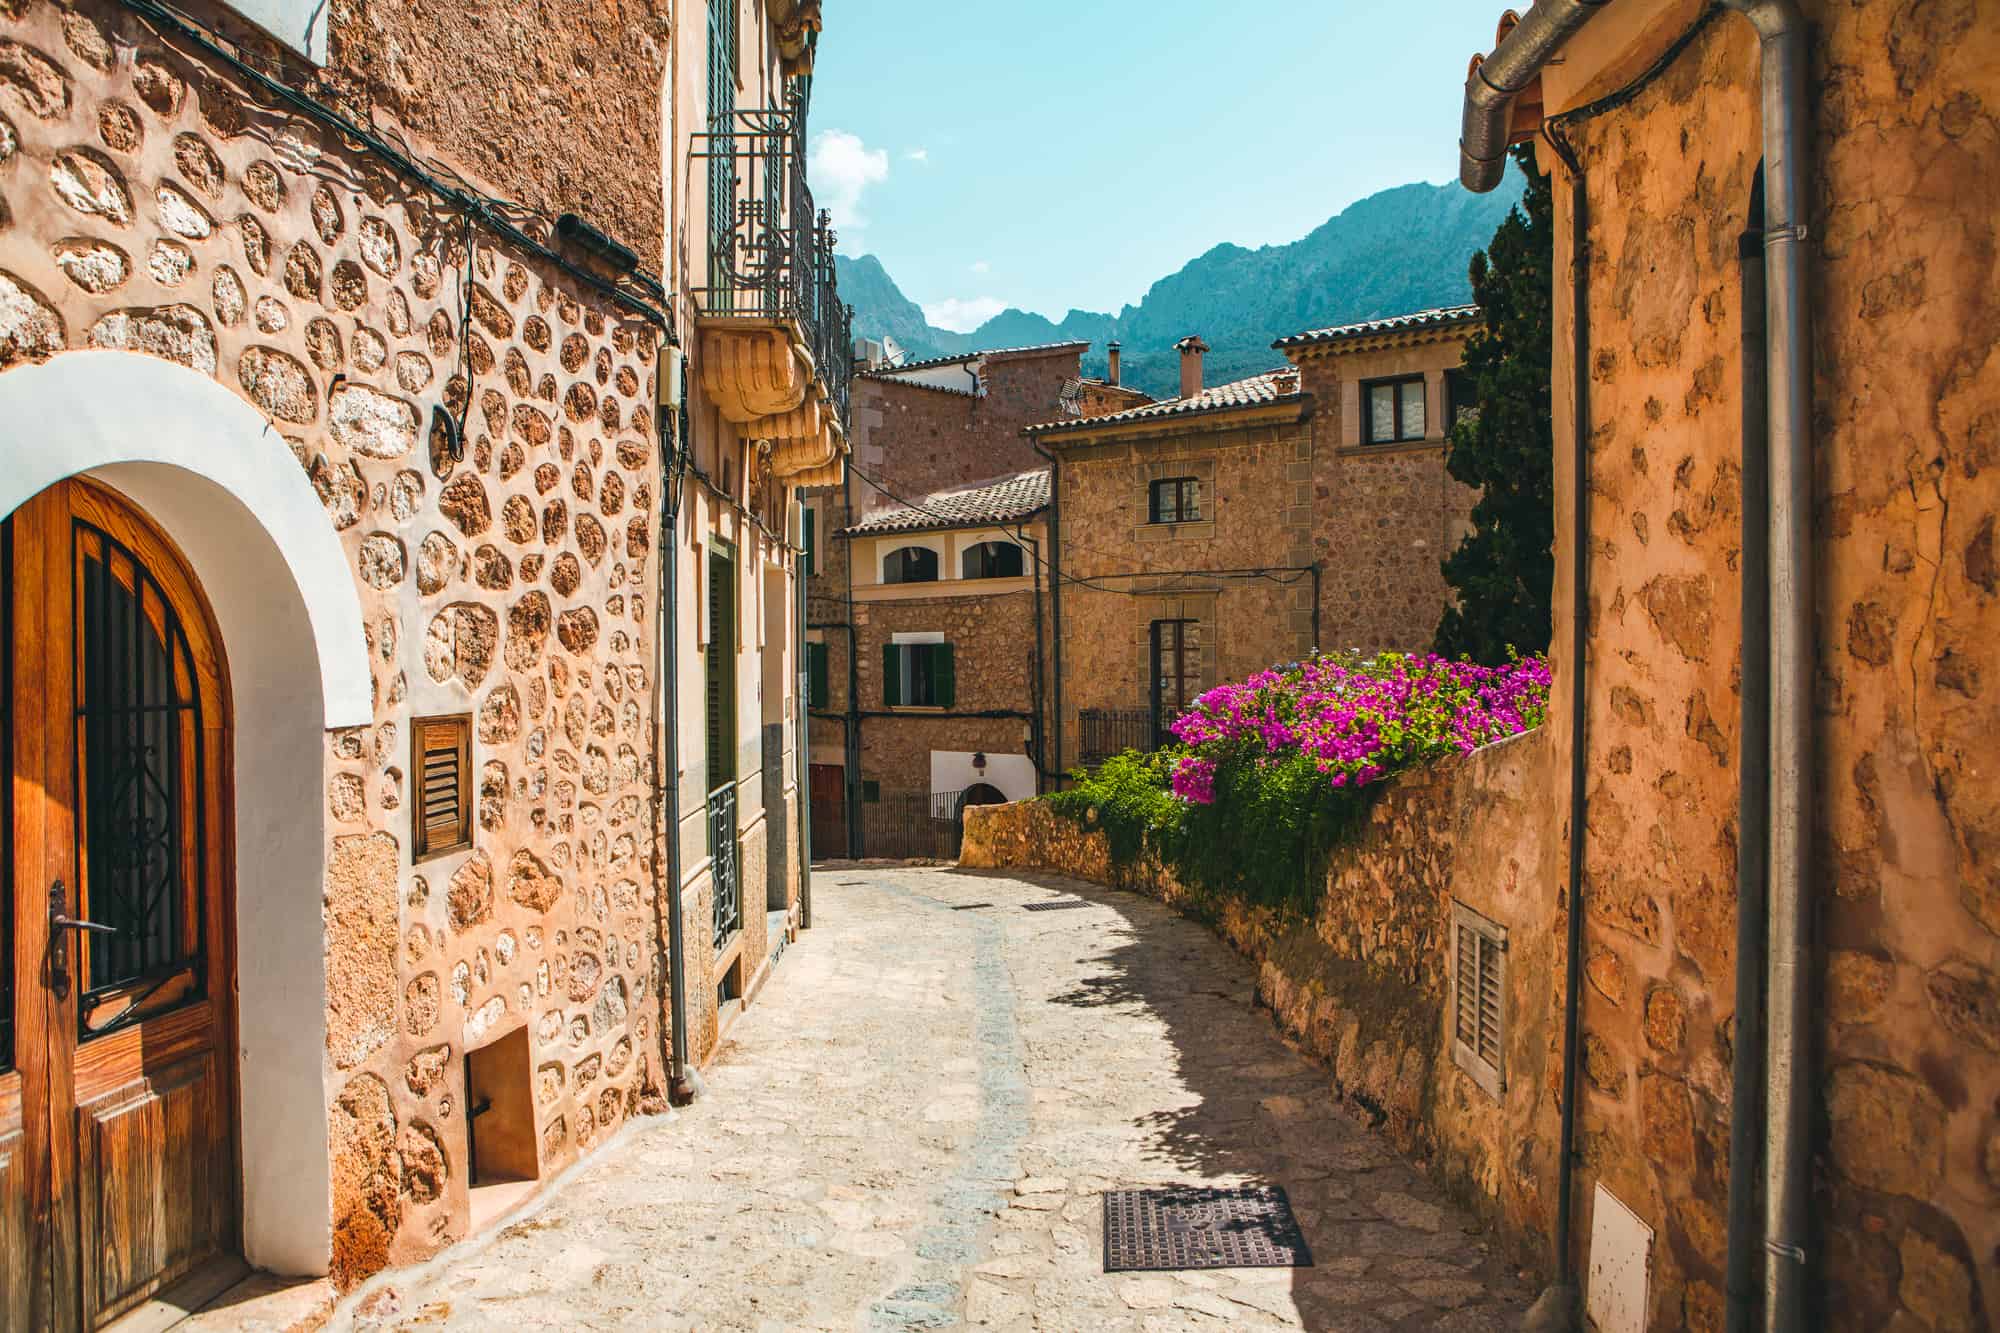 View the picturesque Spanish-style village Fornalutx, Majorca